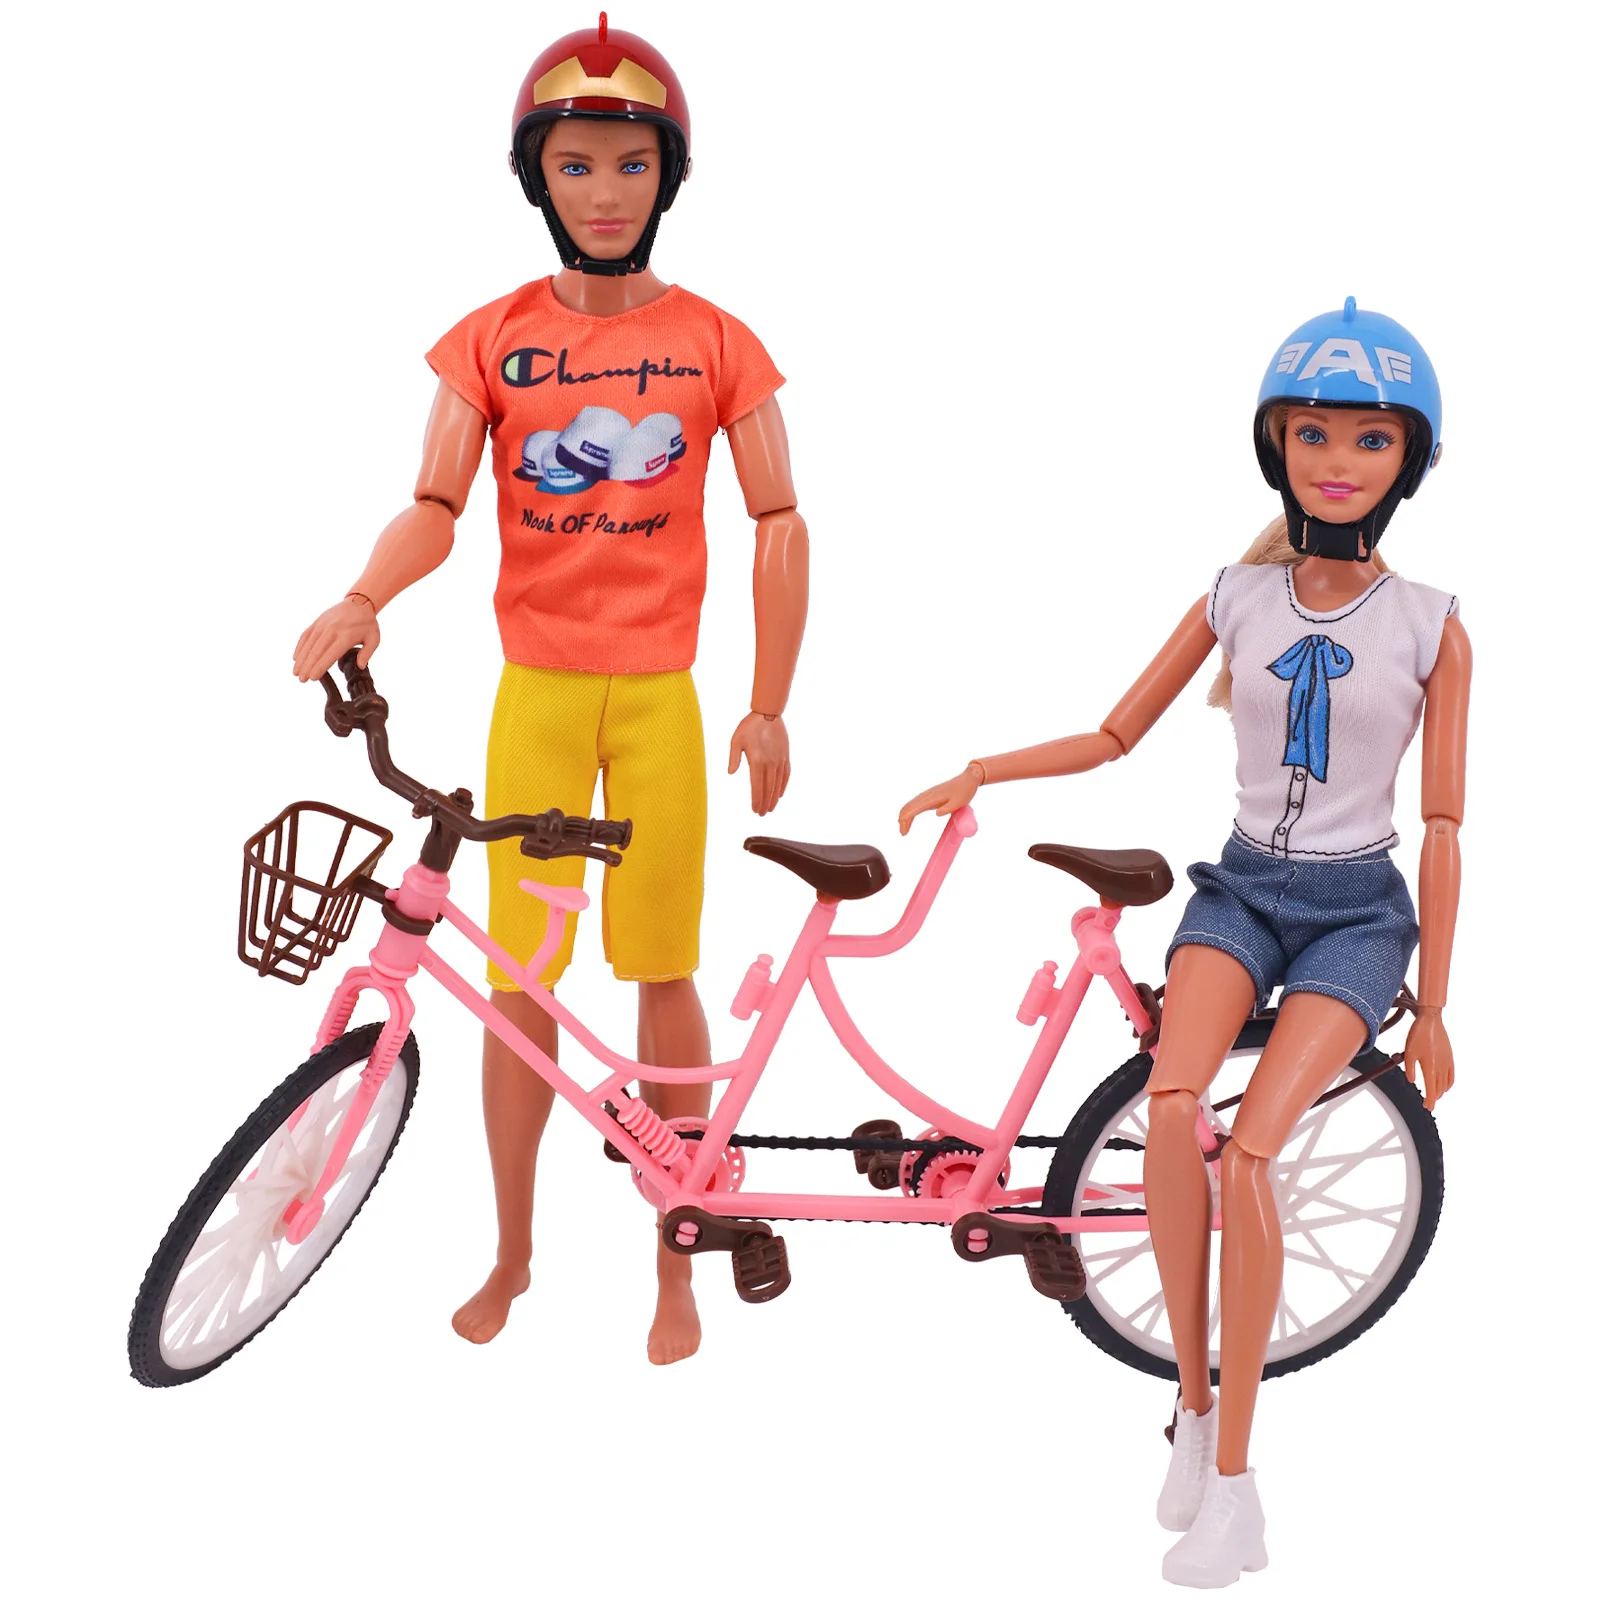 Barbiees Miniature Helmet Toy Doll House Accessories Bicycle Protection Hat Helmet(Wthout Keychain) Barbiees&BJD DollAccessories solar autodarkening welding mask accessories welding wearing for welding helmet welding mask eye protection protect prthe face